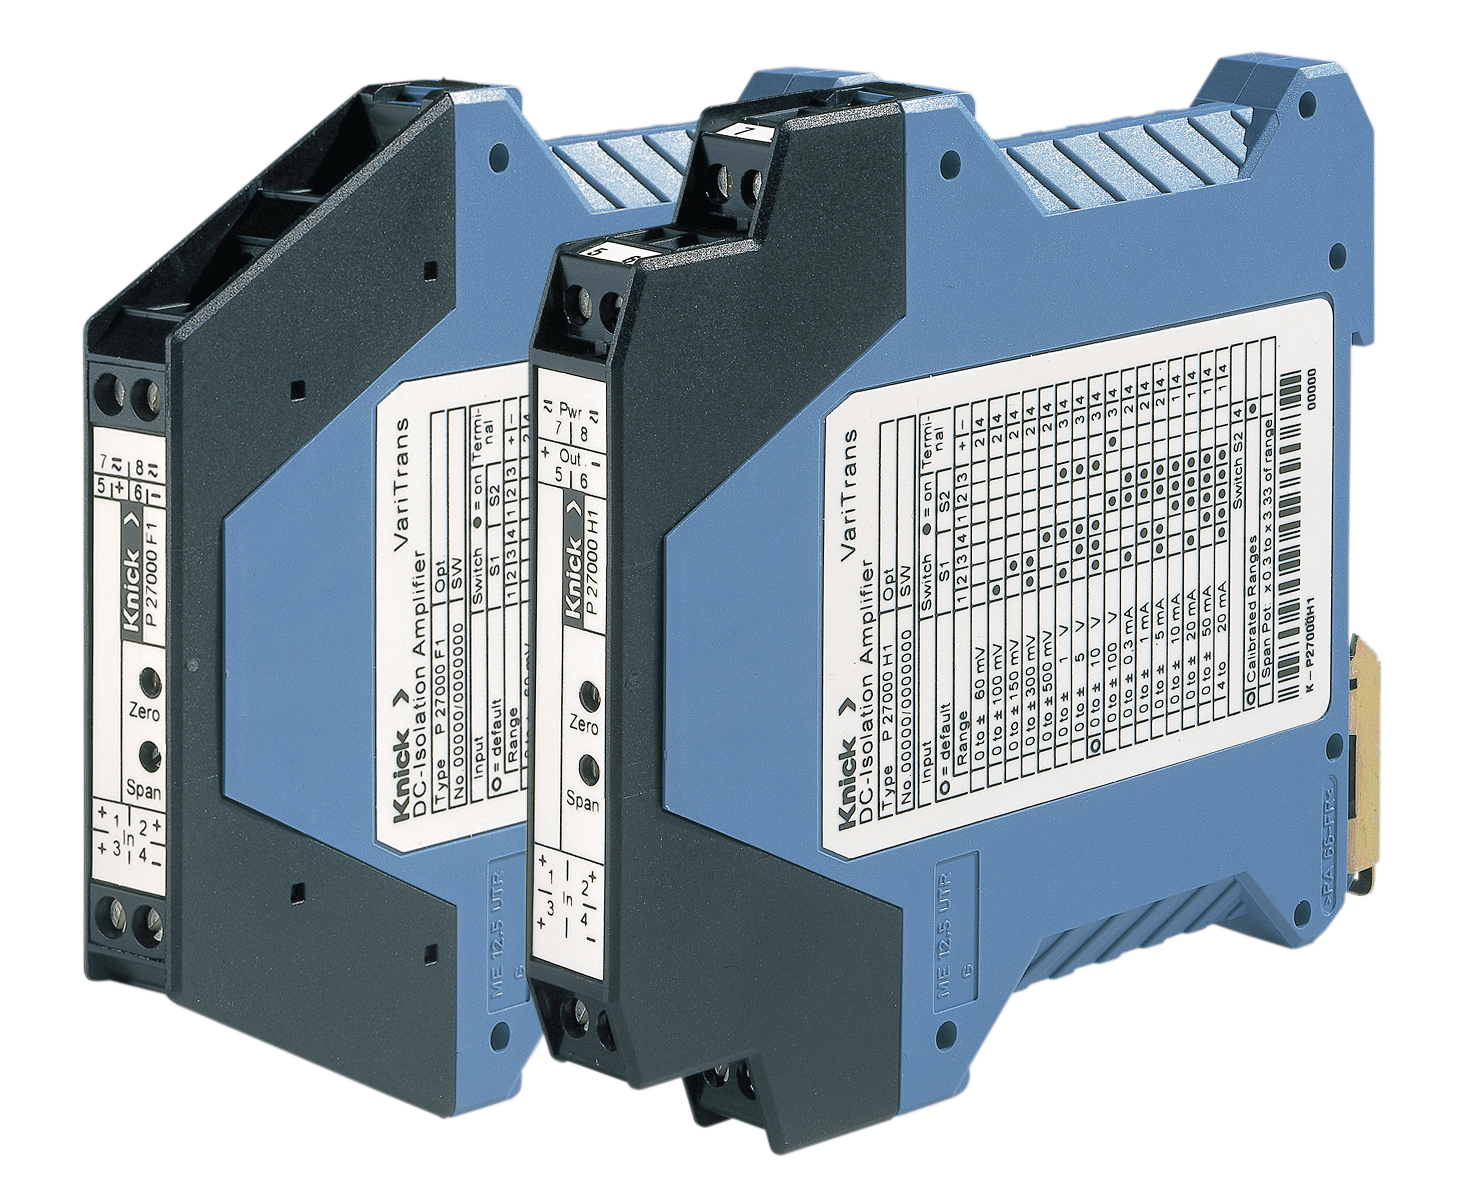 P27000 Universal Isolated Signal Conditioner | Calibrated switching of 480 input and output ranges | Isolation up to 1000 V